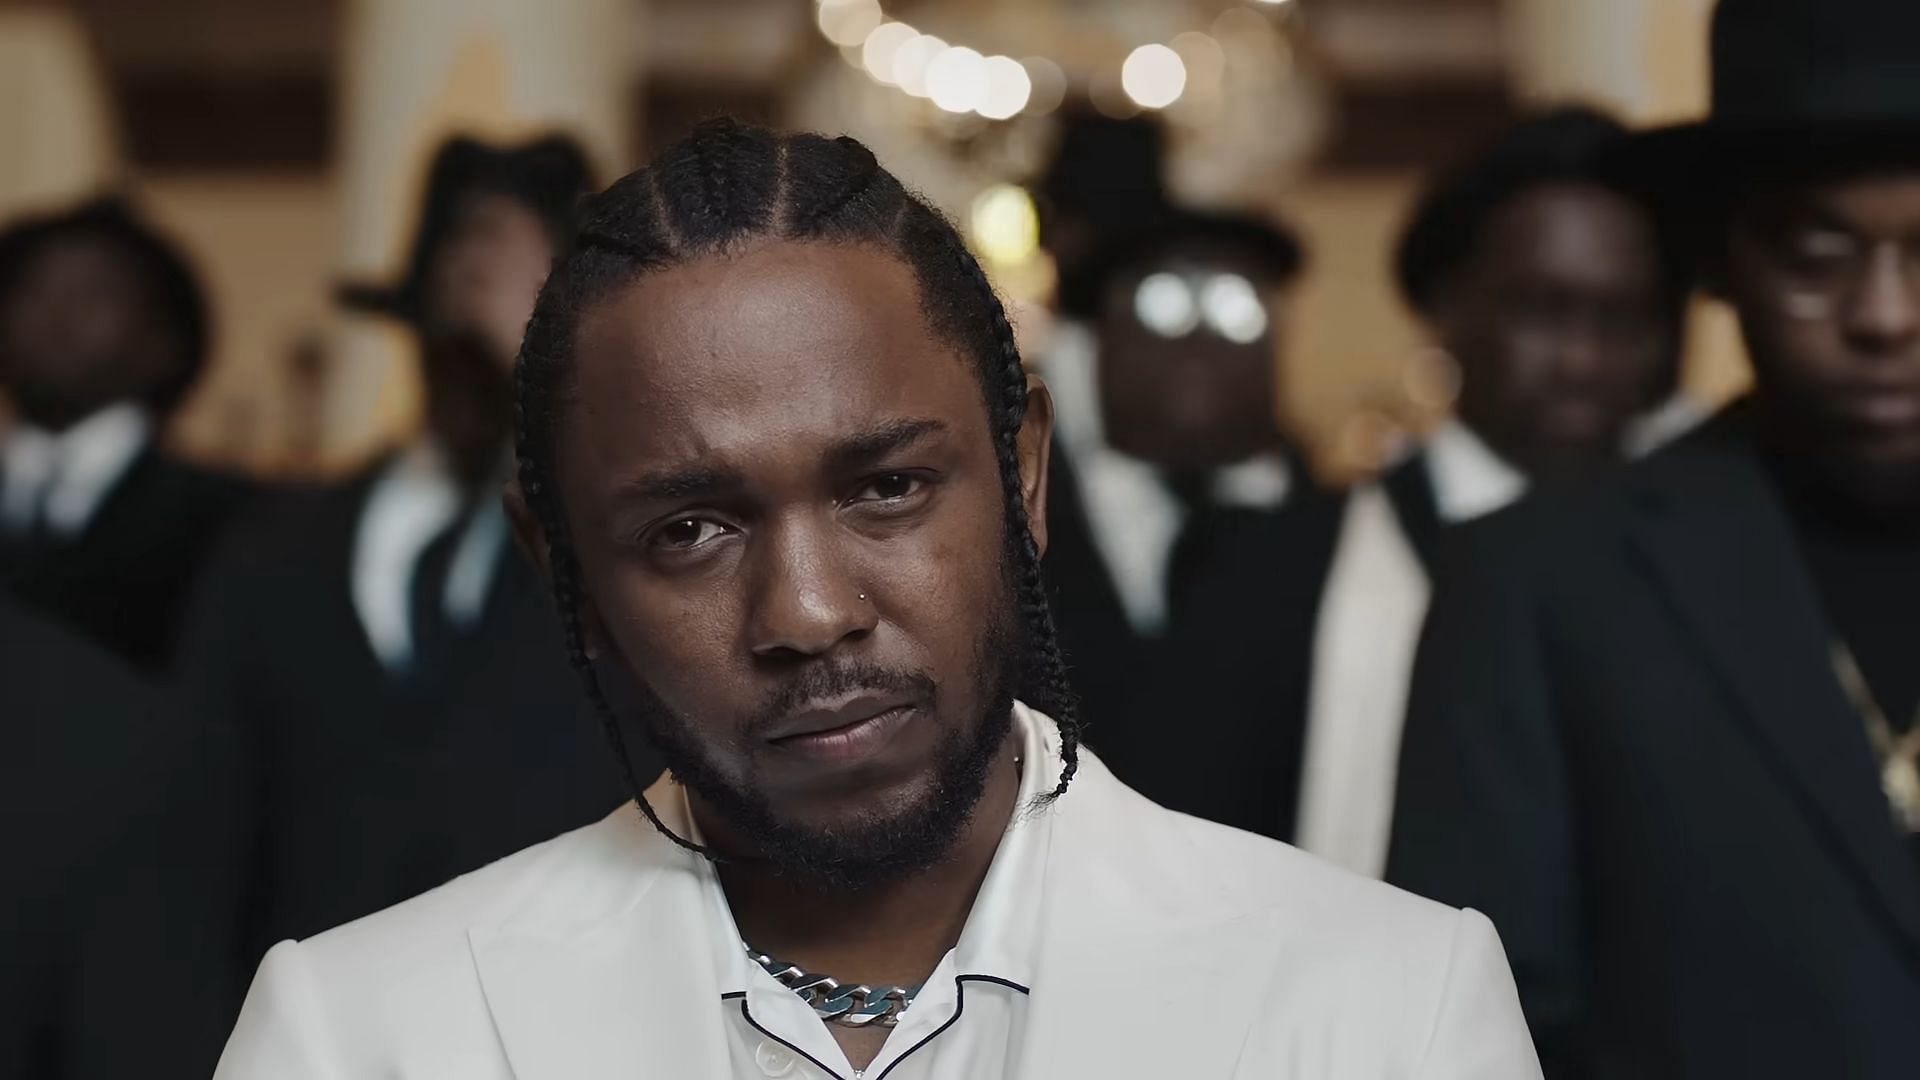 K. Dot returned to Compton to shoot the music video for 